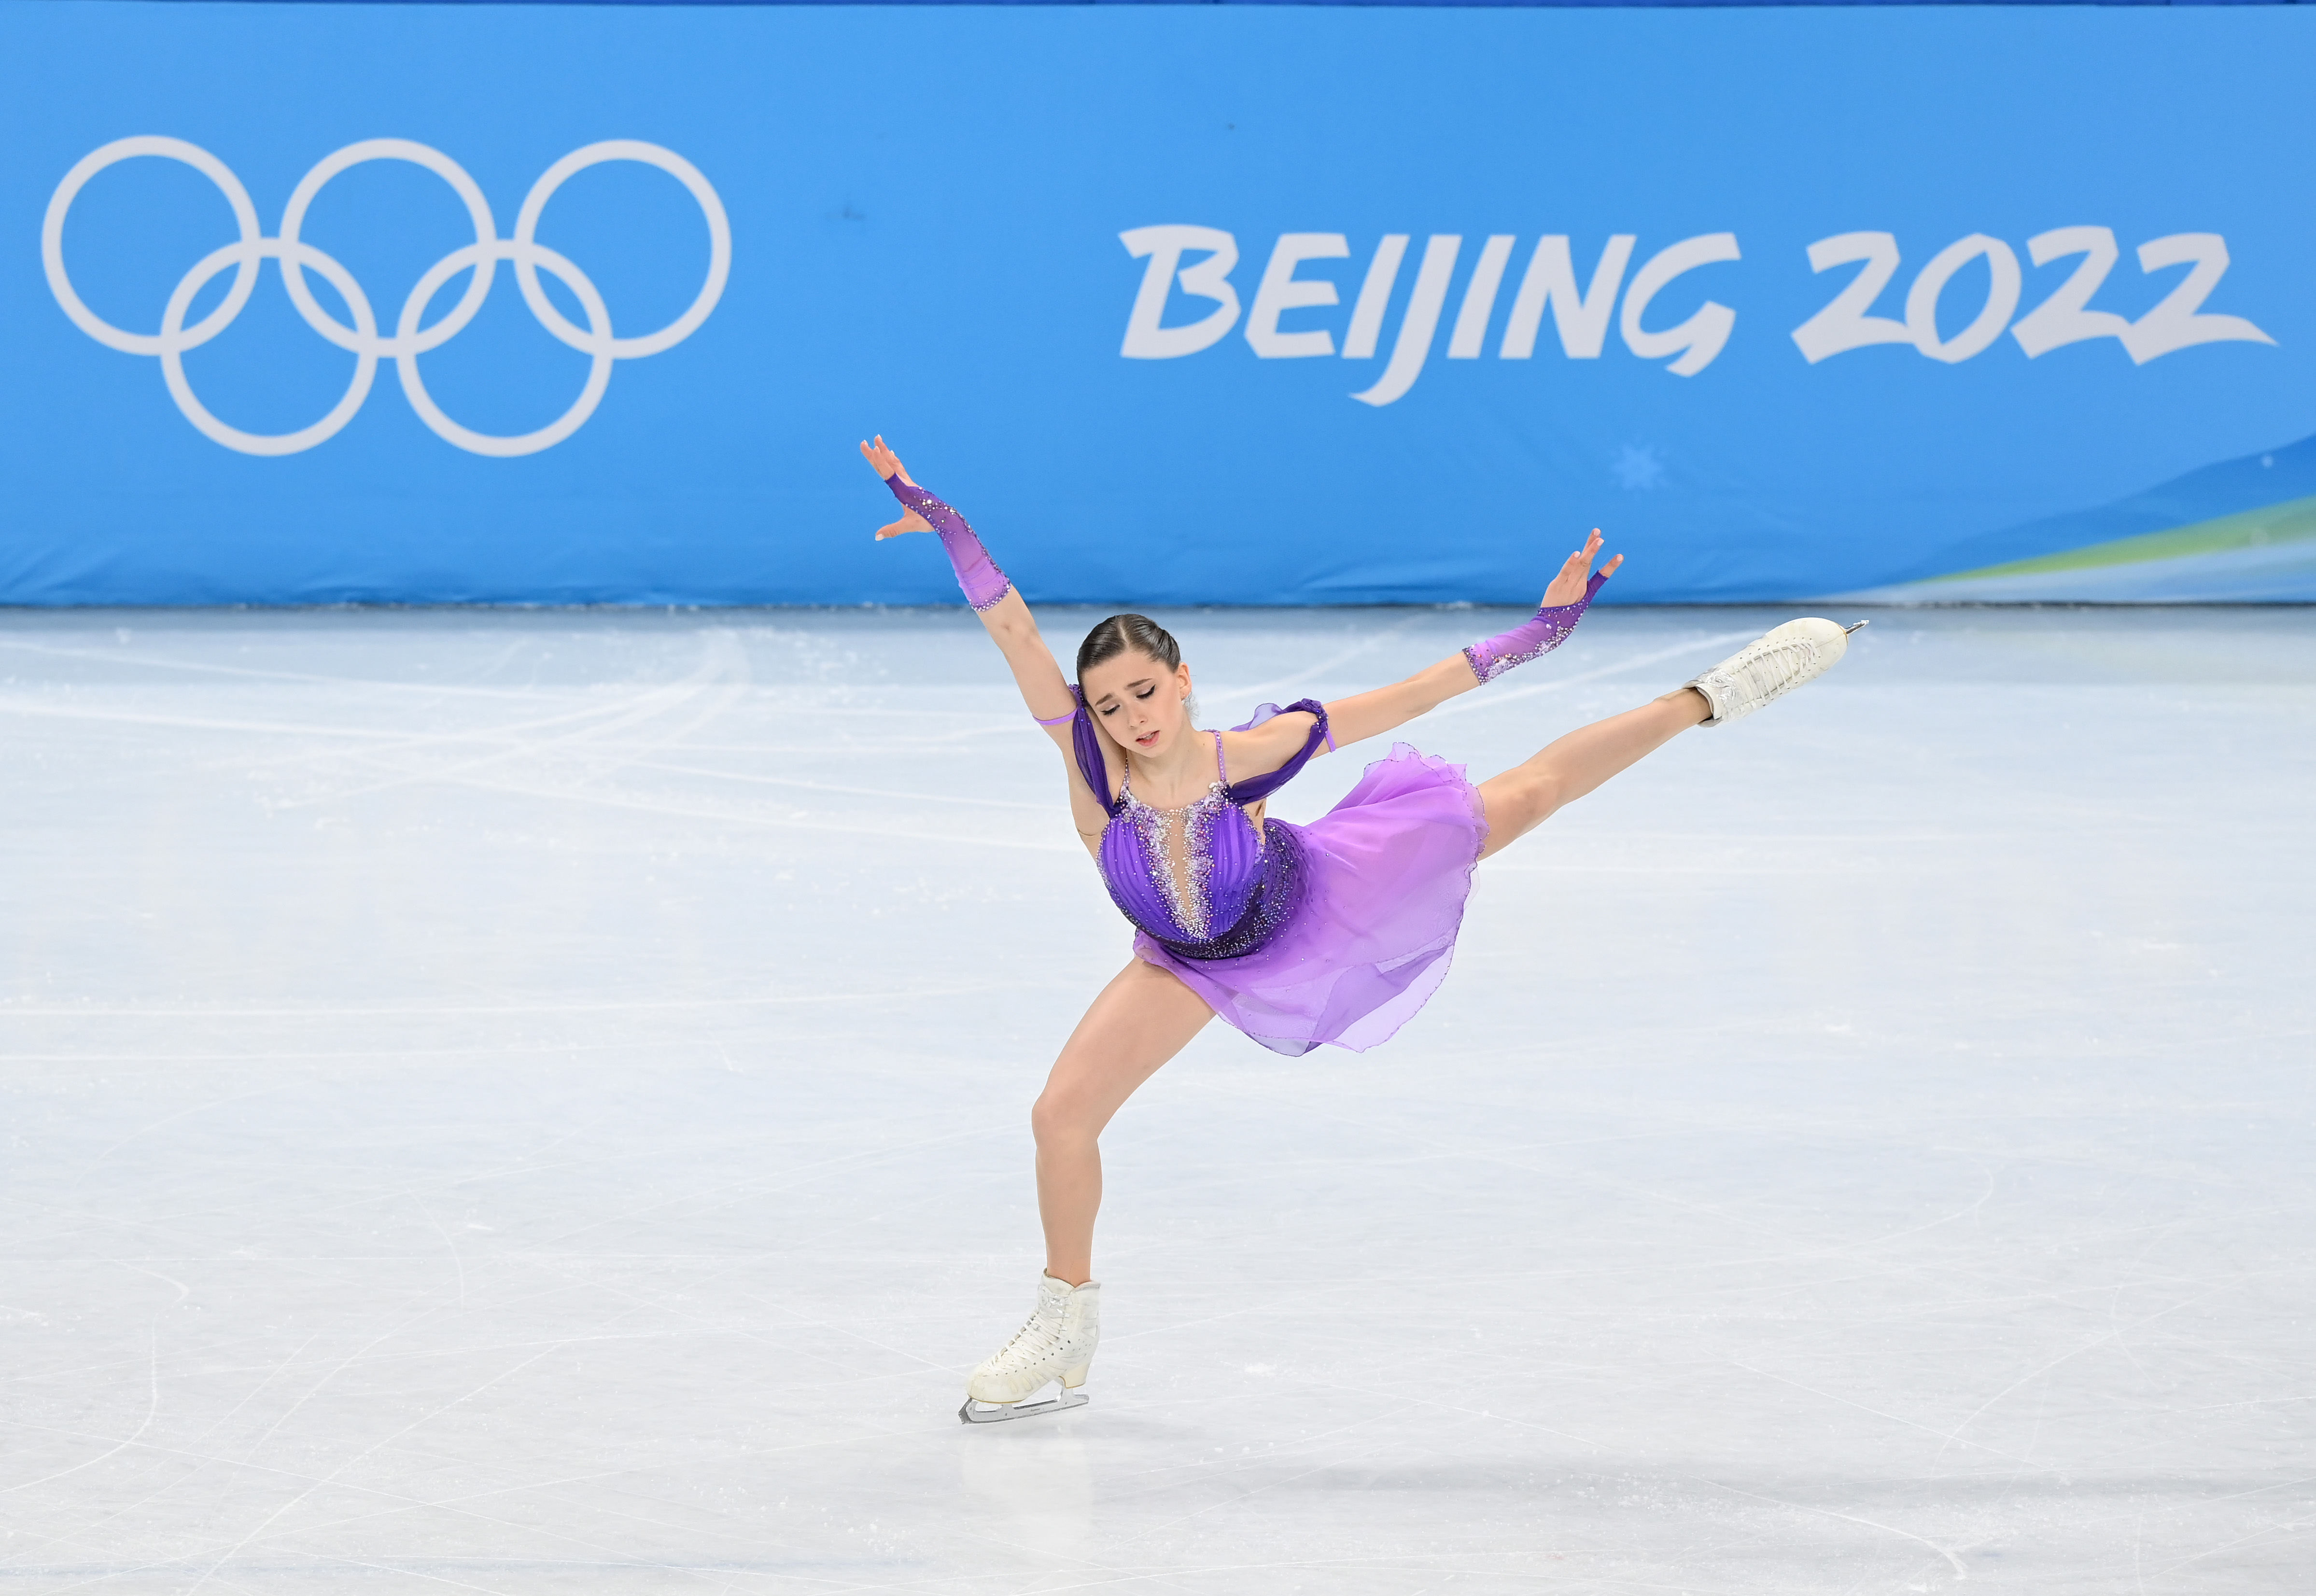 Figure Skating Body Details Proposal to Hike Age Limit to 17 for 2026 Winter Olympics